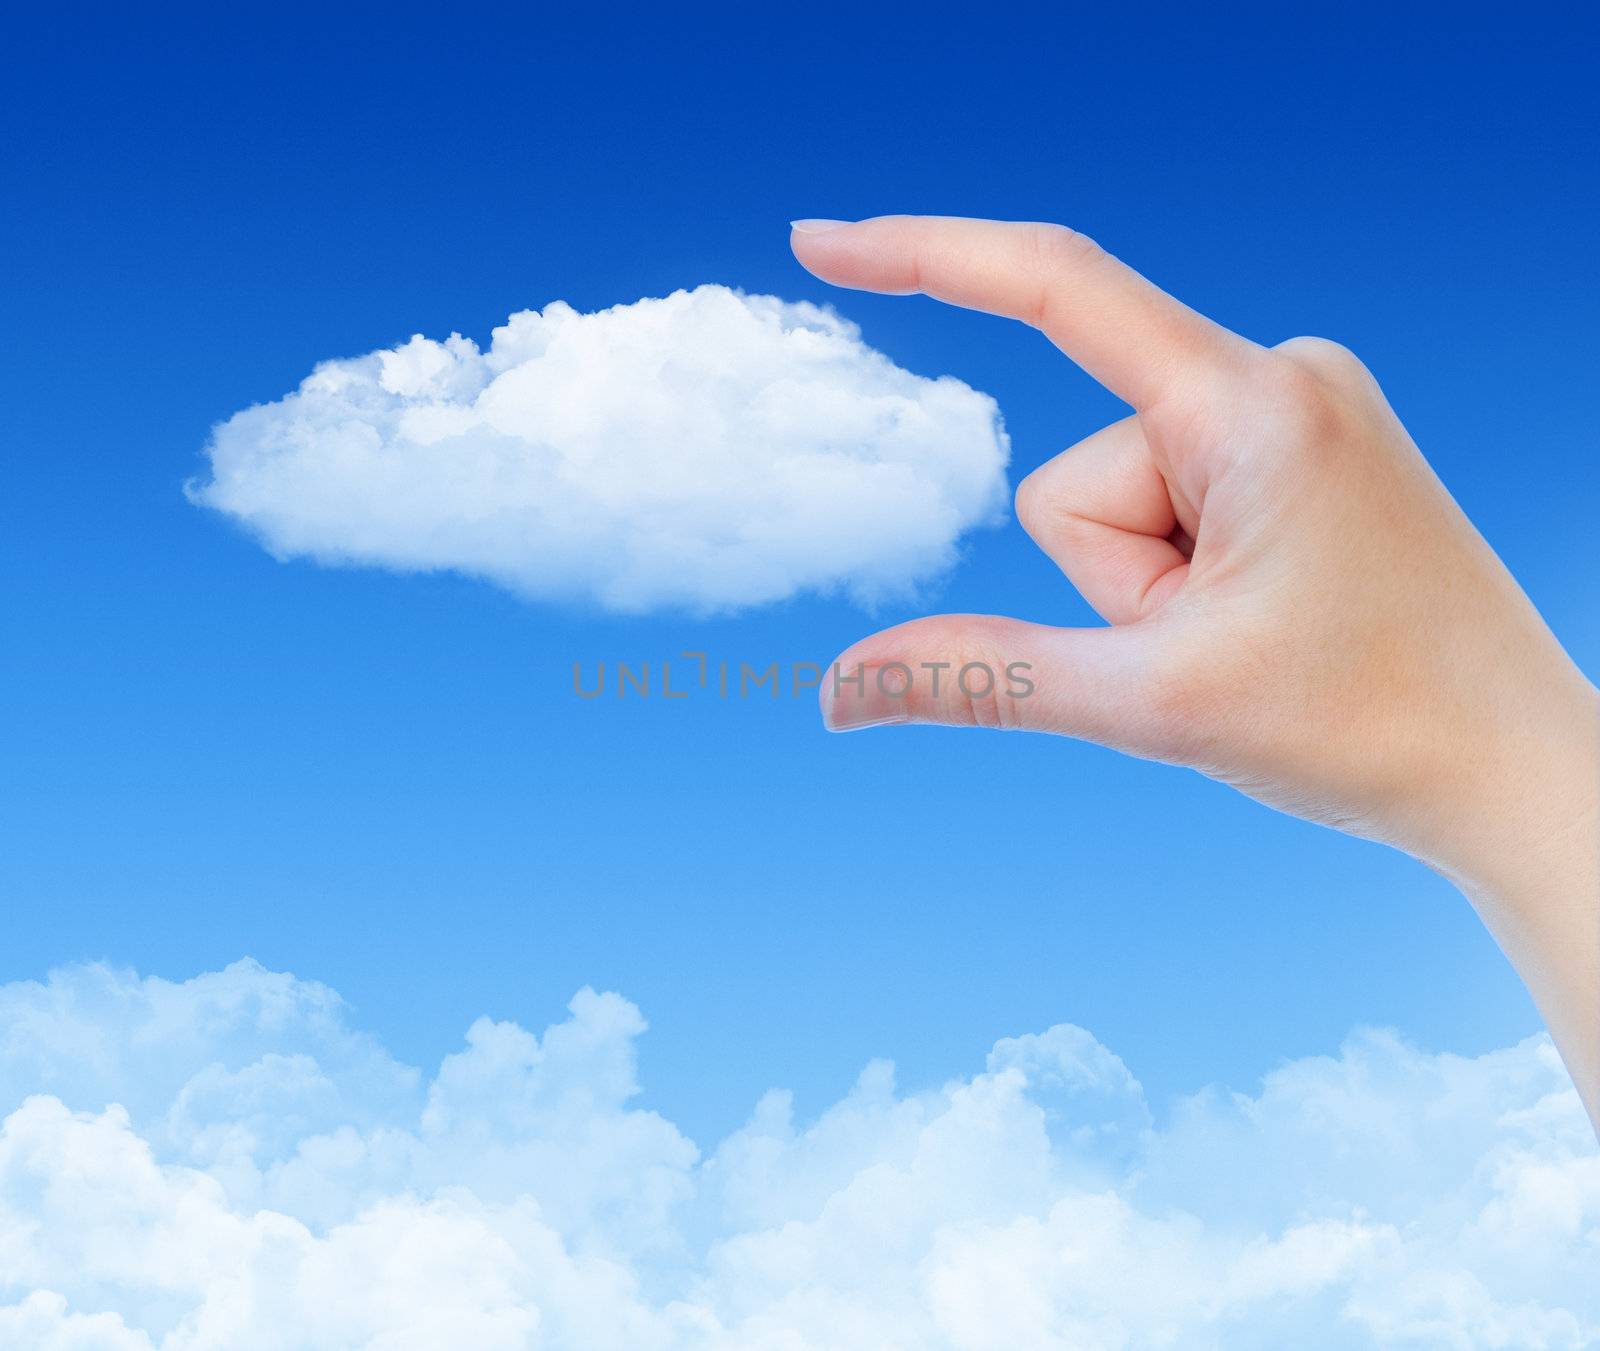 Woman hand measures the cloud against blue sky with clouds. Concept image on cloud computing and eco theme.